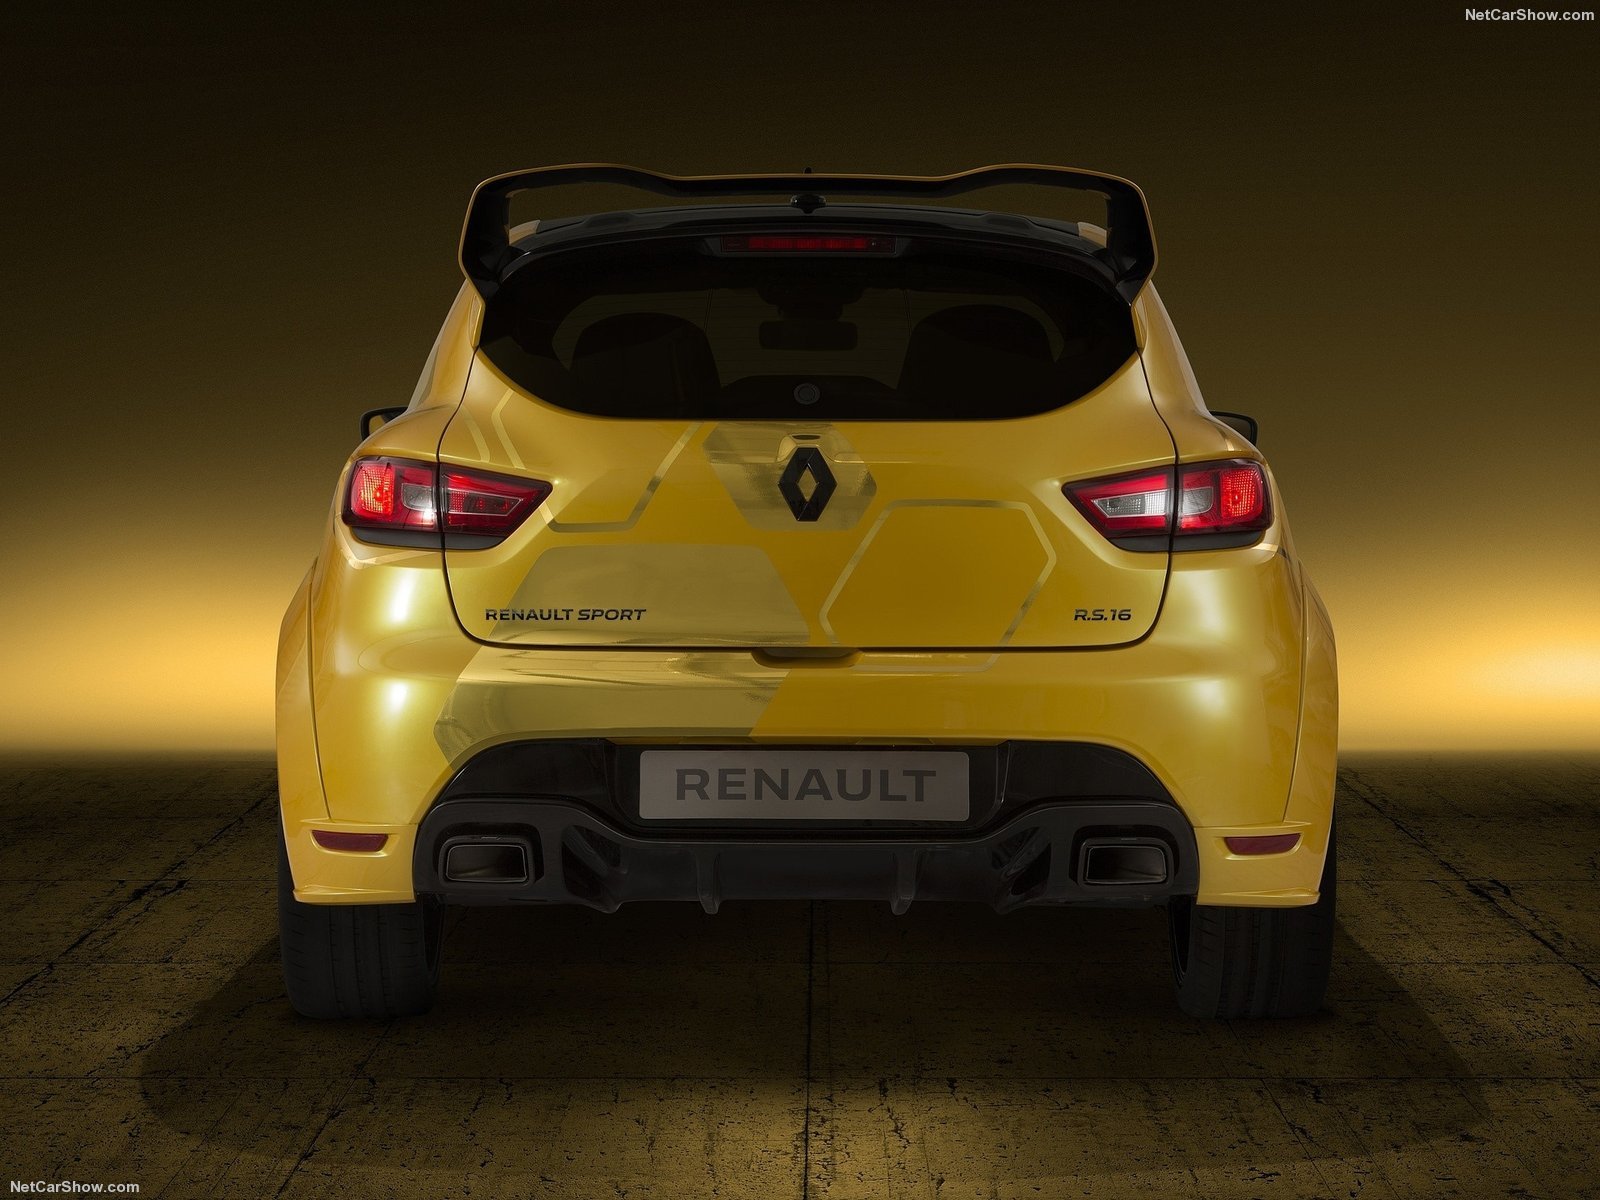 renault, Clio, Rs16, Cars, Concept, 2016 Wallpaper